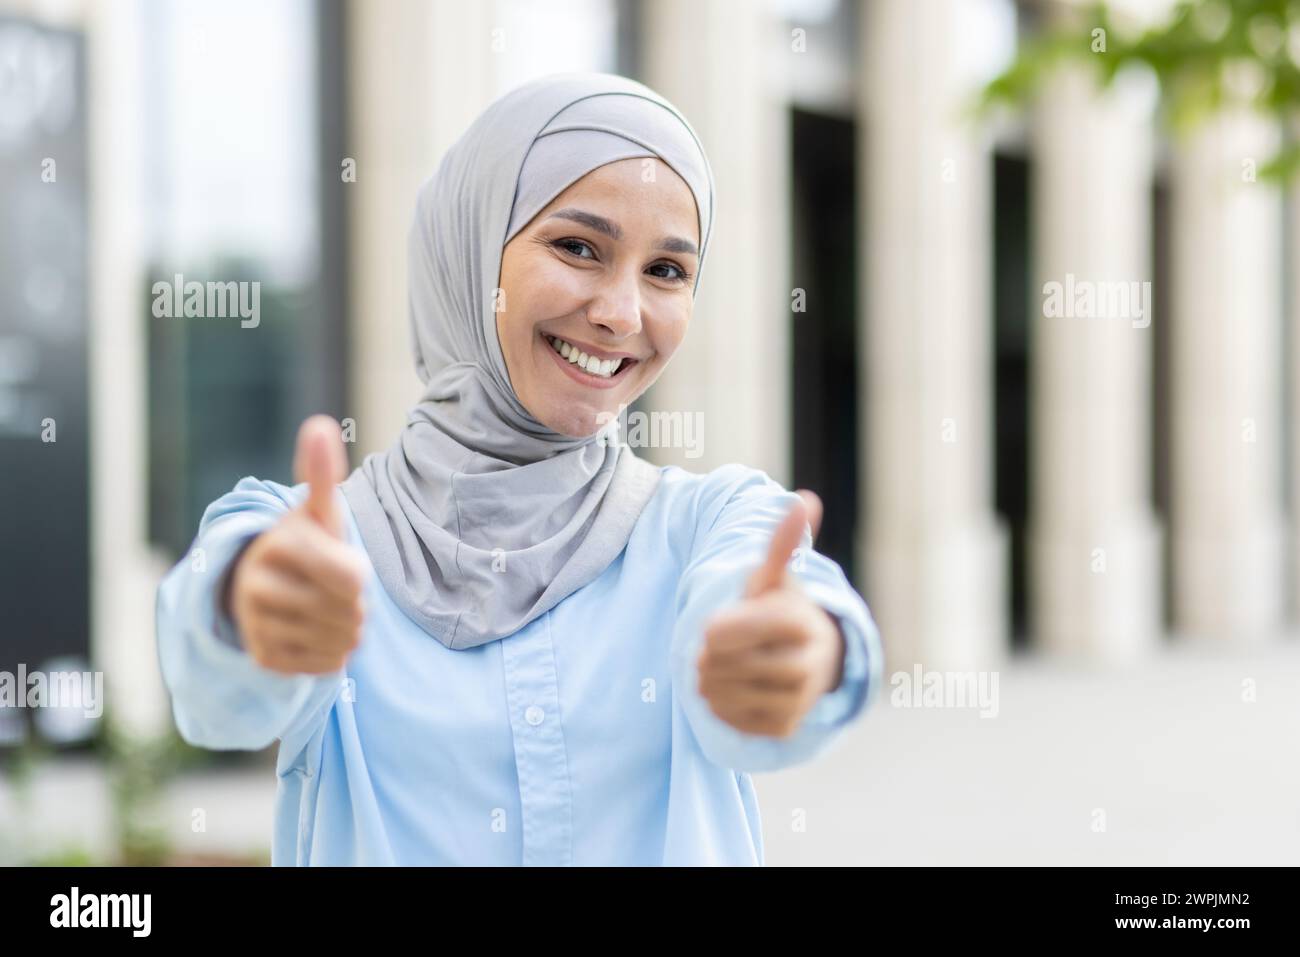 A cheerful, young woman wearing a hijab gives a double thumbs up with a broad, confident smile, signaling approval and success. Stock Photo